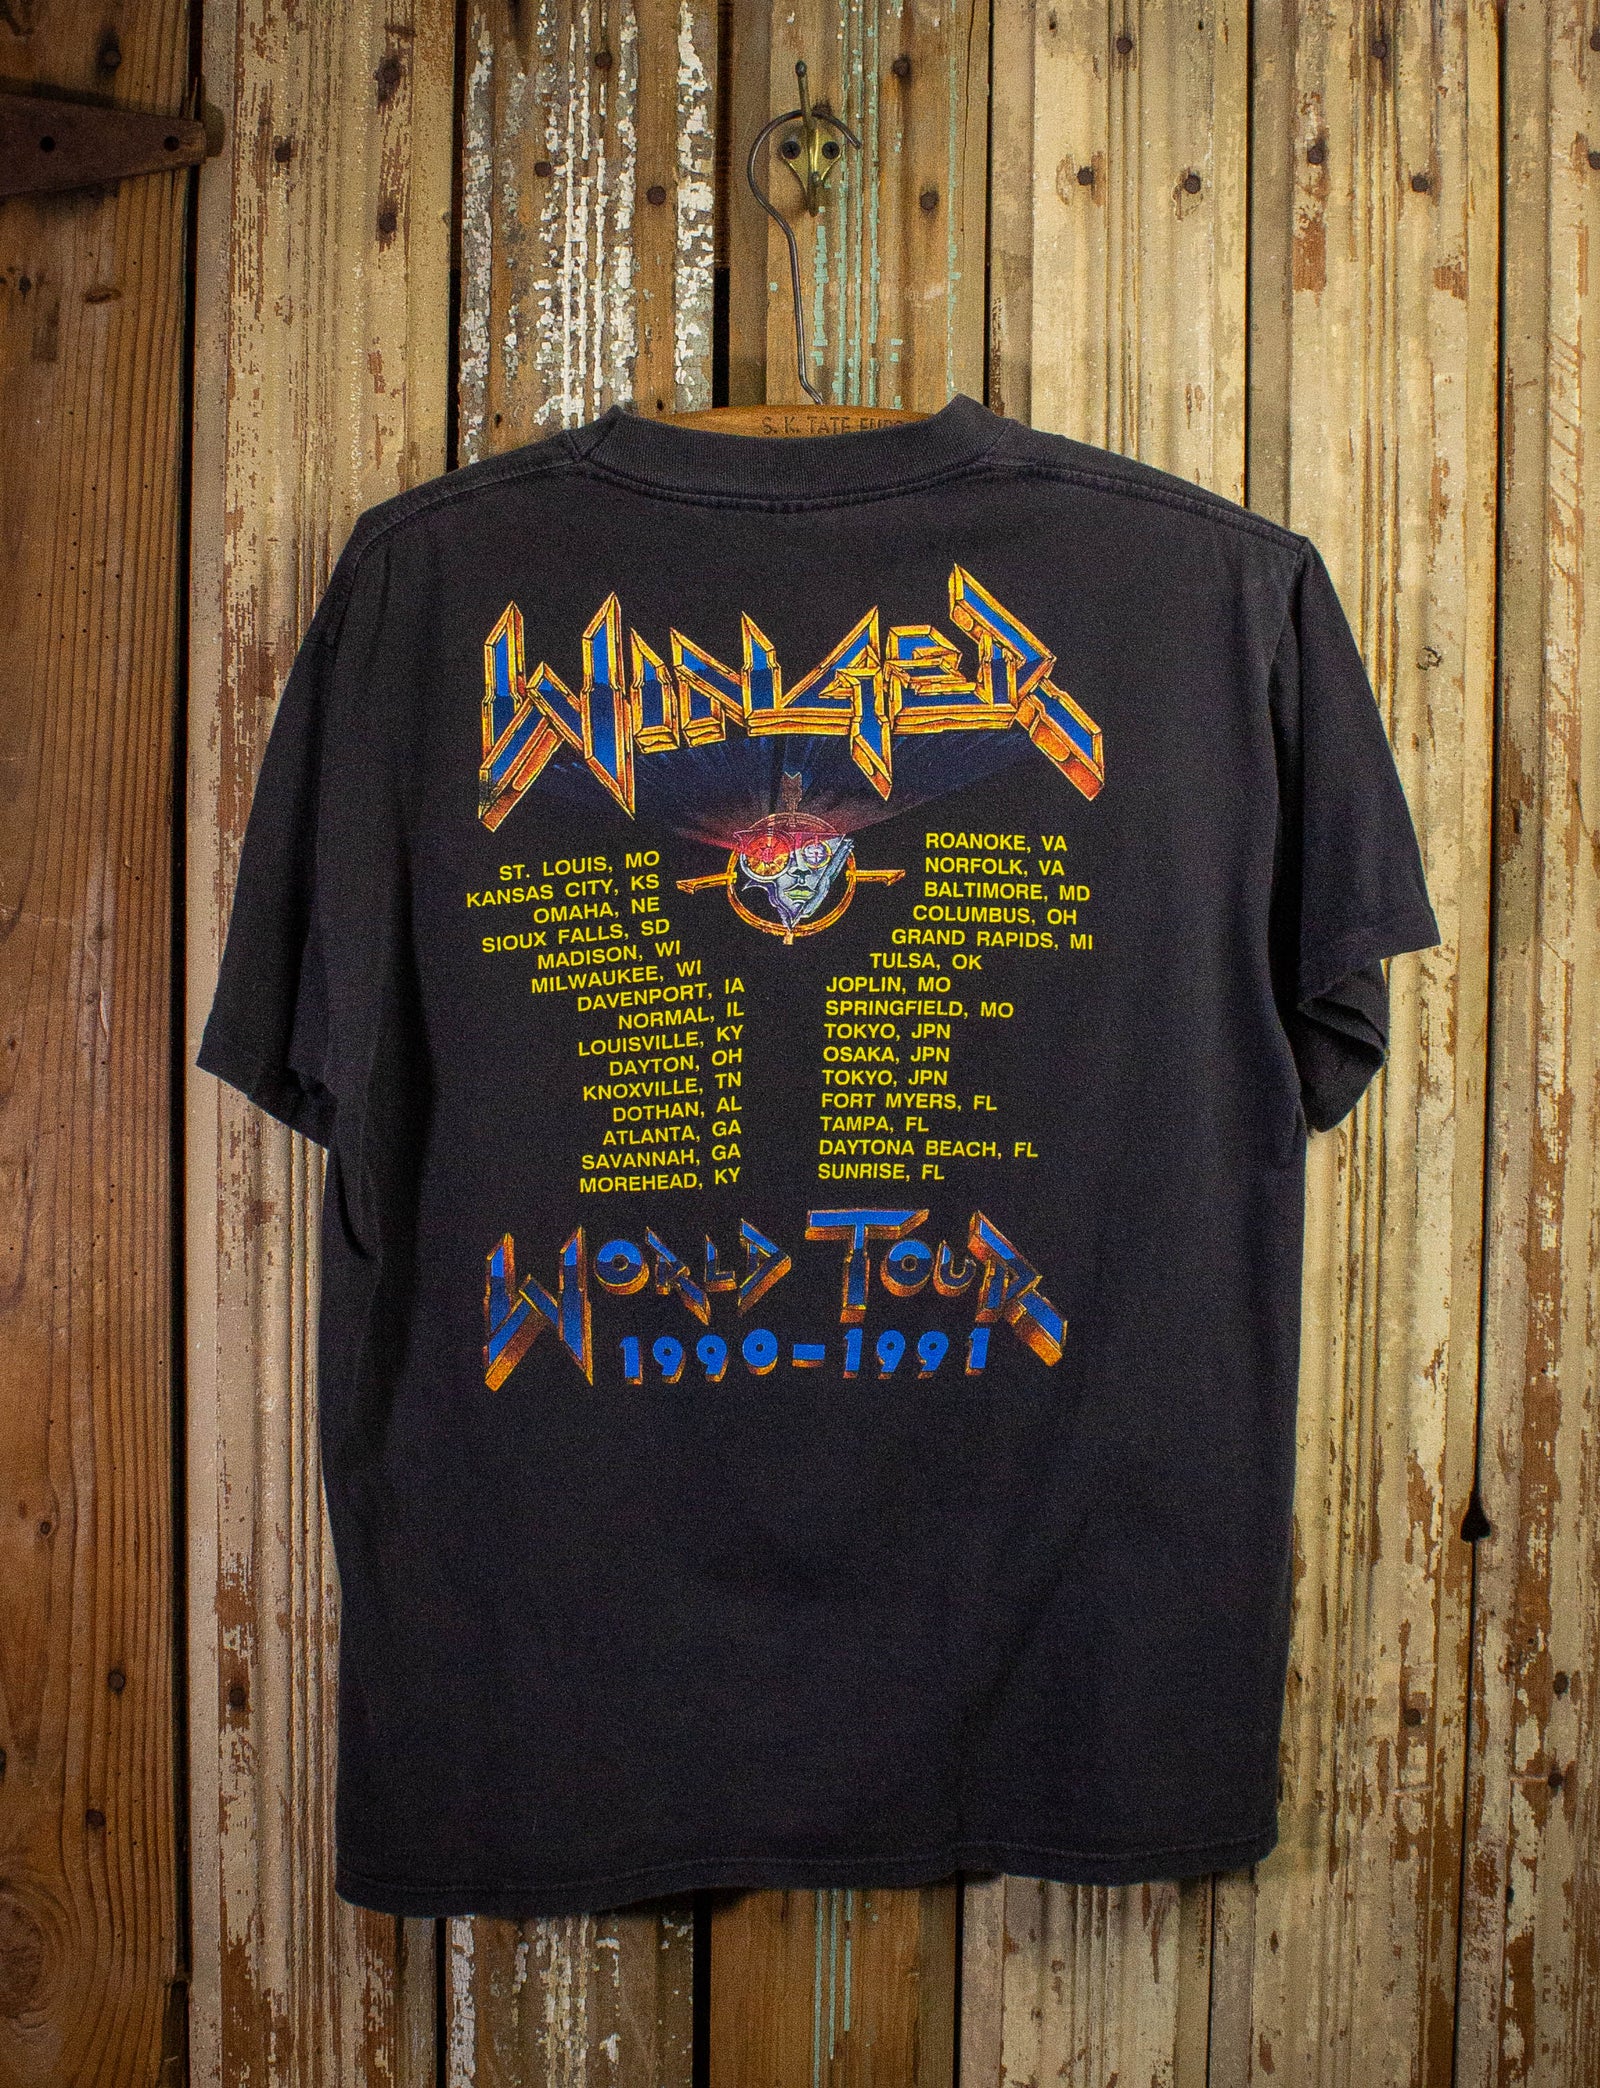 Vintage Winger In the Heart of the Young World Tour Concert T Shirt 1990-1991 Black Large